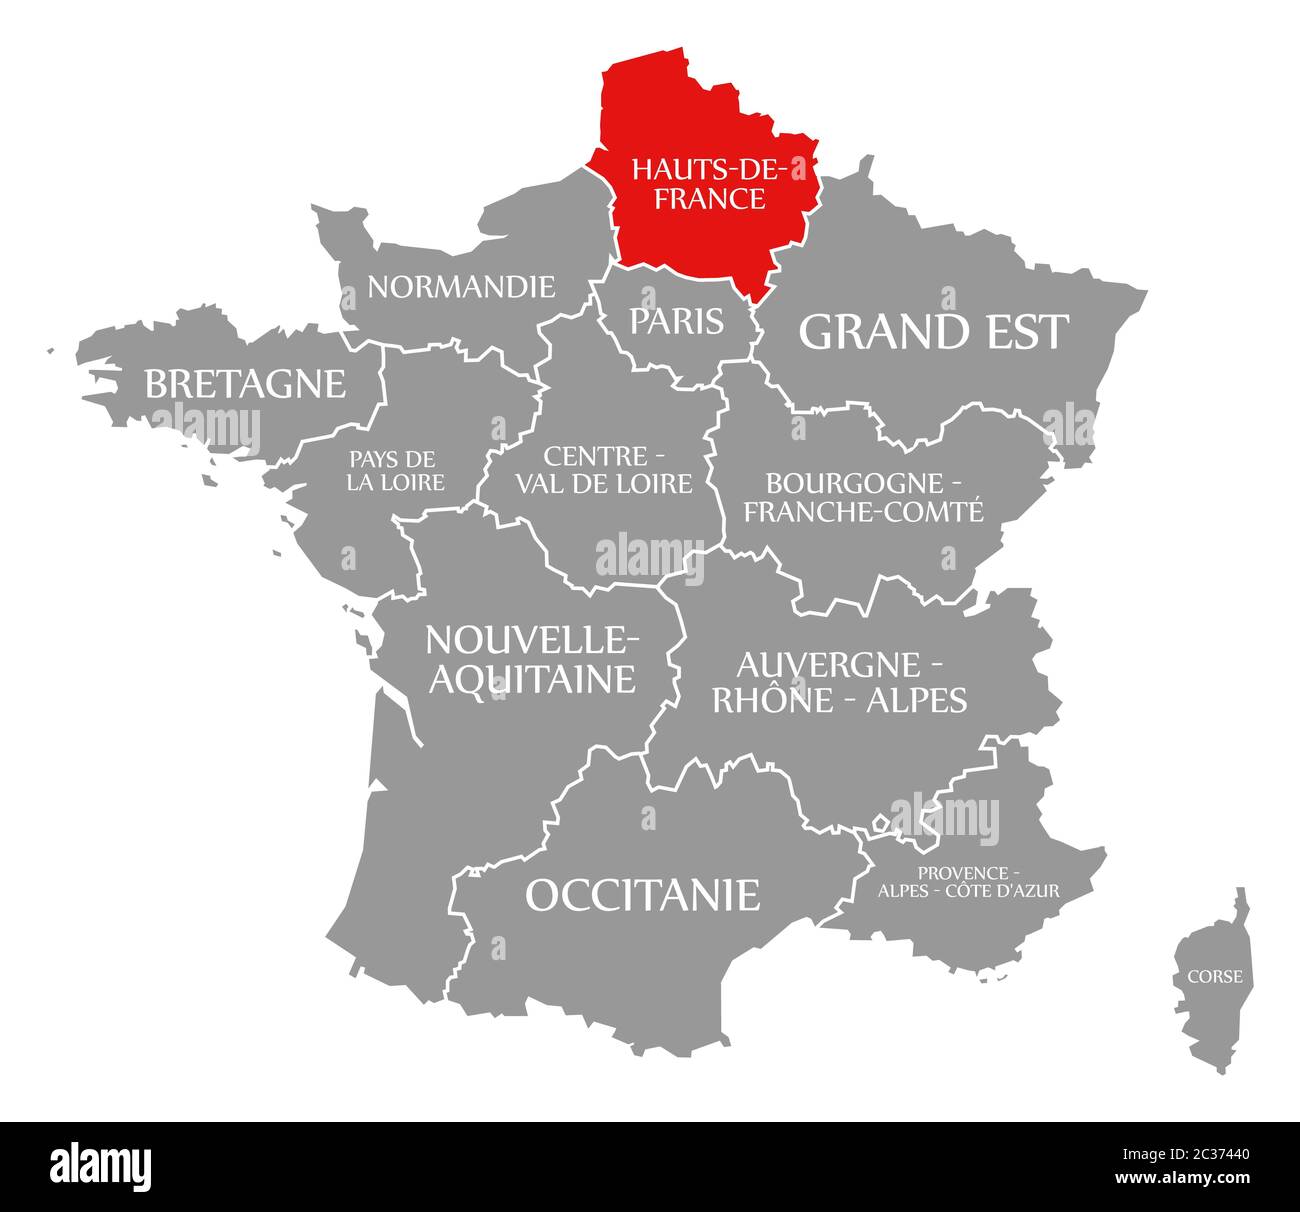 Hauts de France red highlighted in map of France Stock Photo